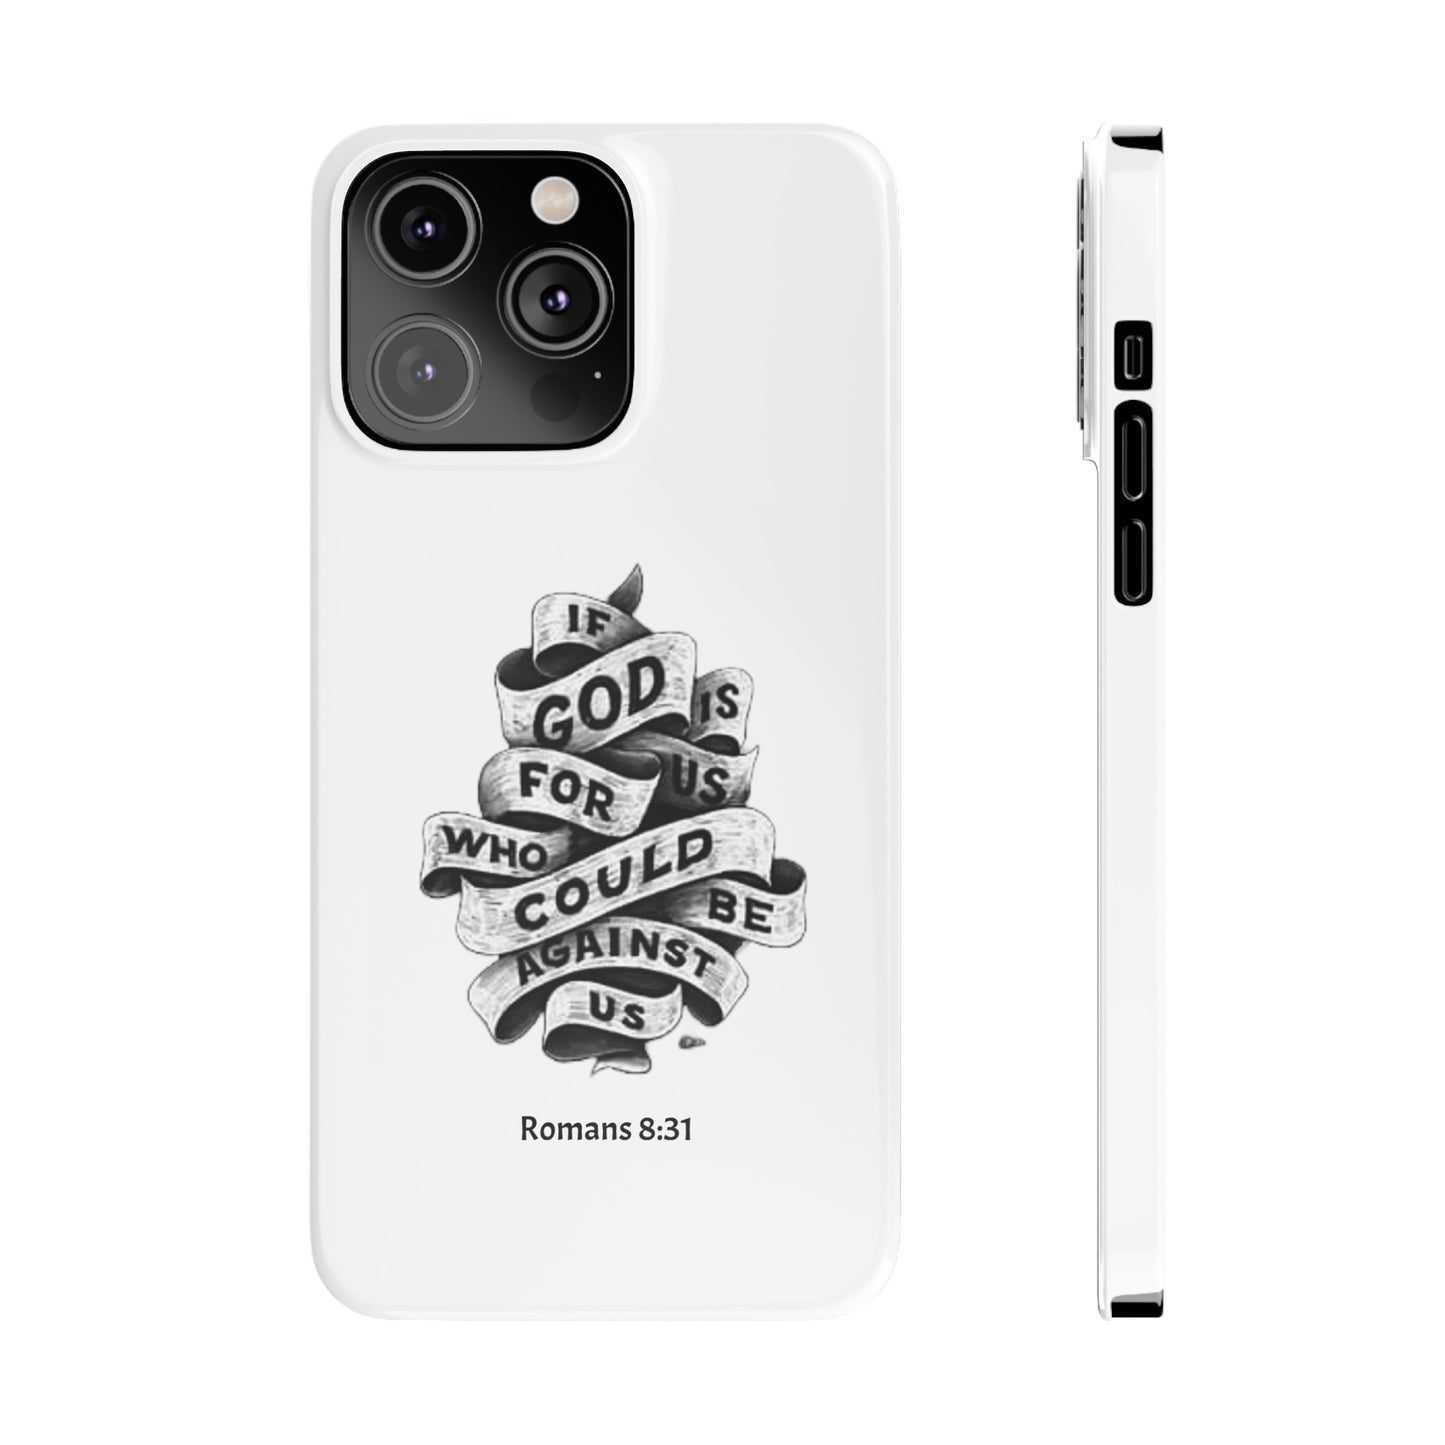 If God Is For Us iPhone Slim Phone Case